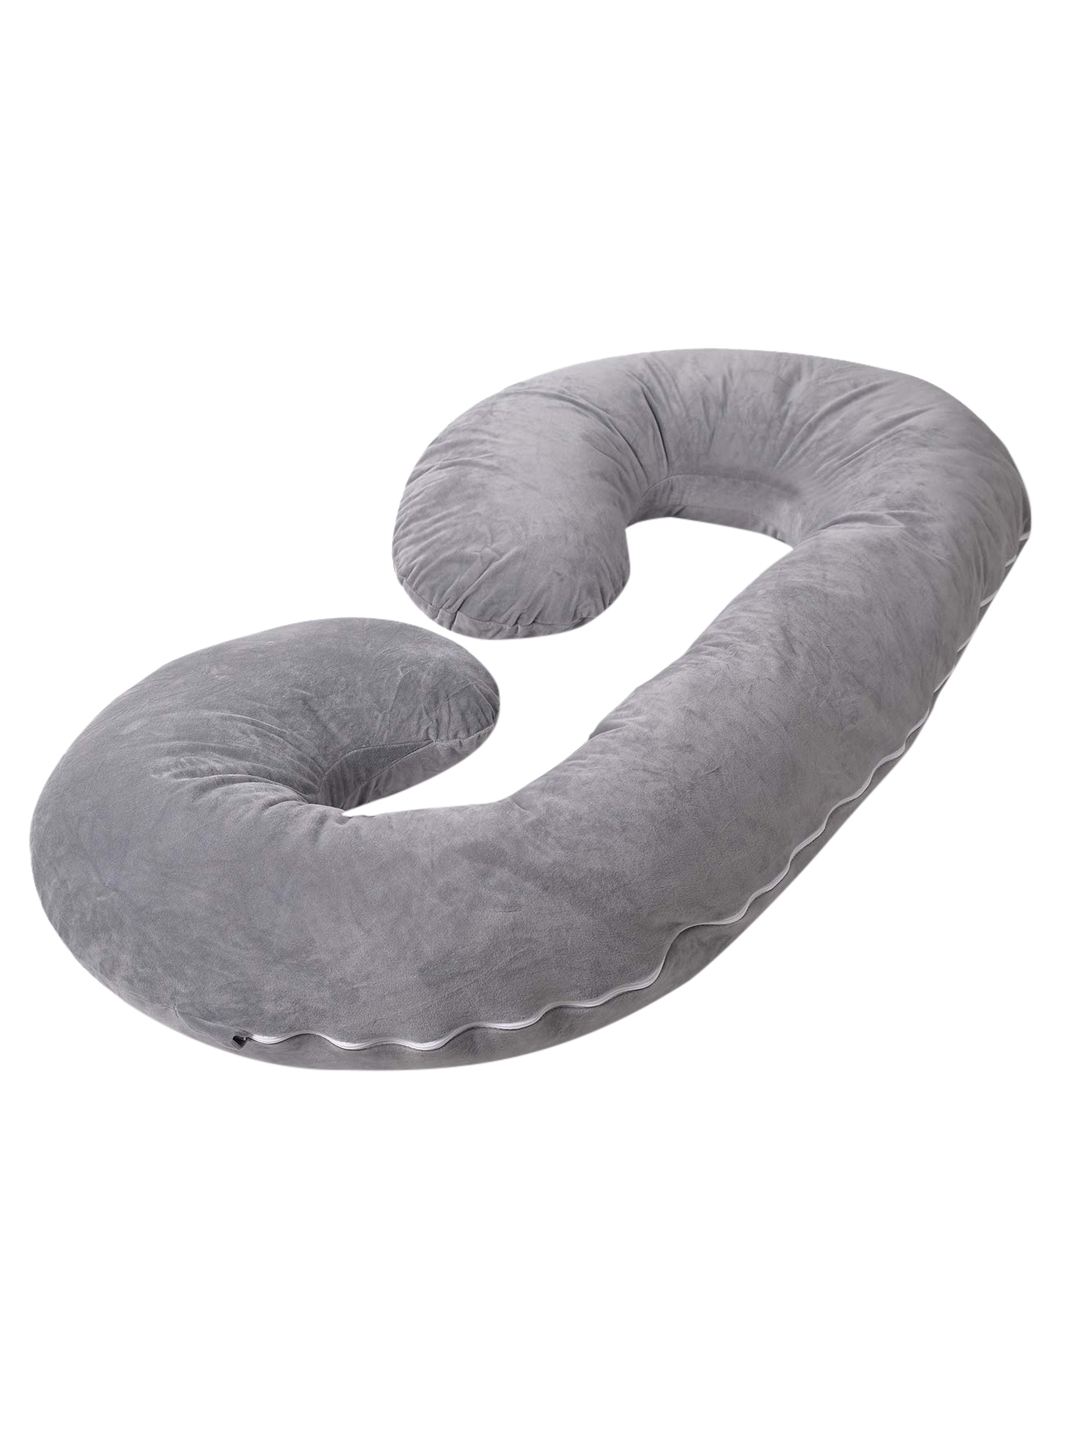 Kuber Industries Grey Cotton Ultra Soft Hollow Fibre C Shaped Maternity Pillow with Zippered Cover